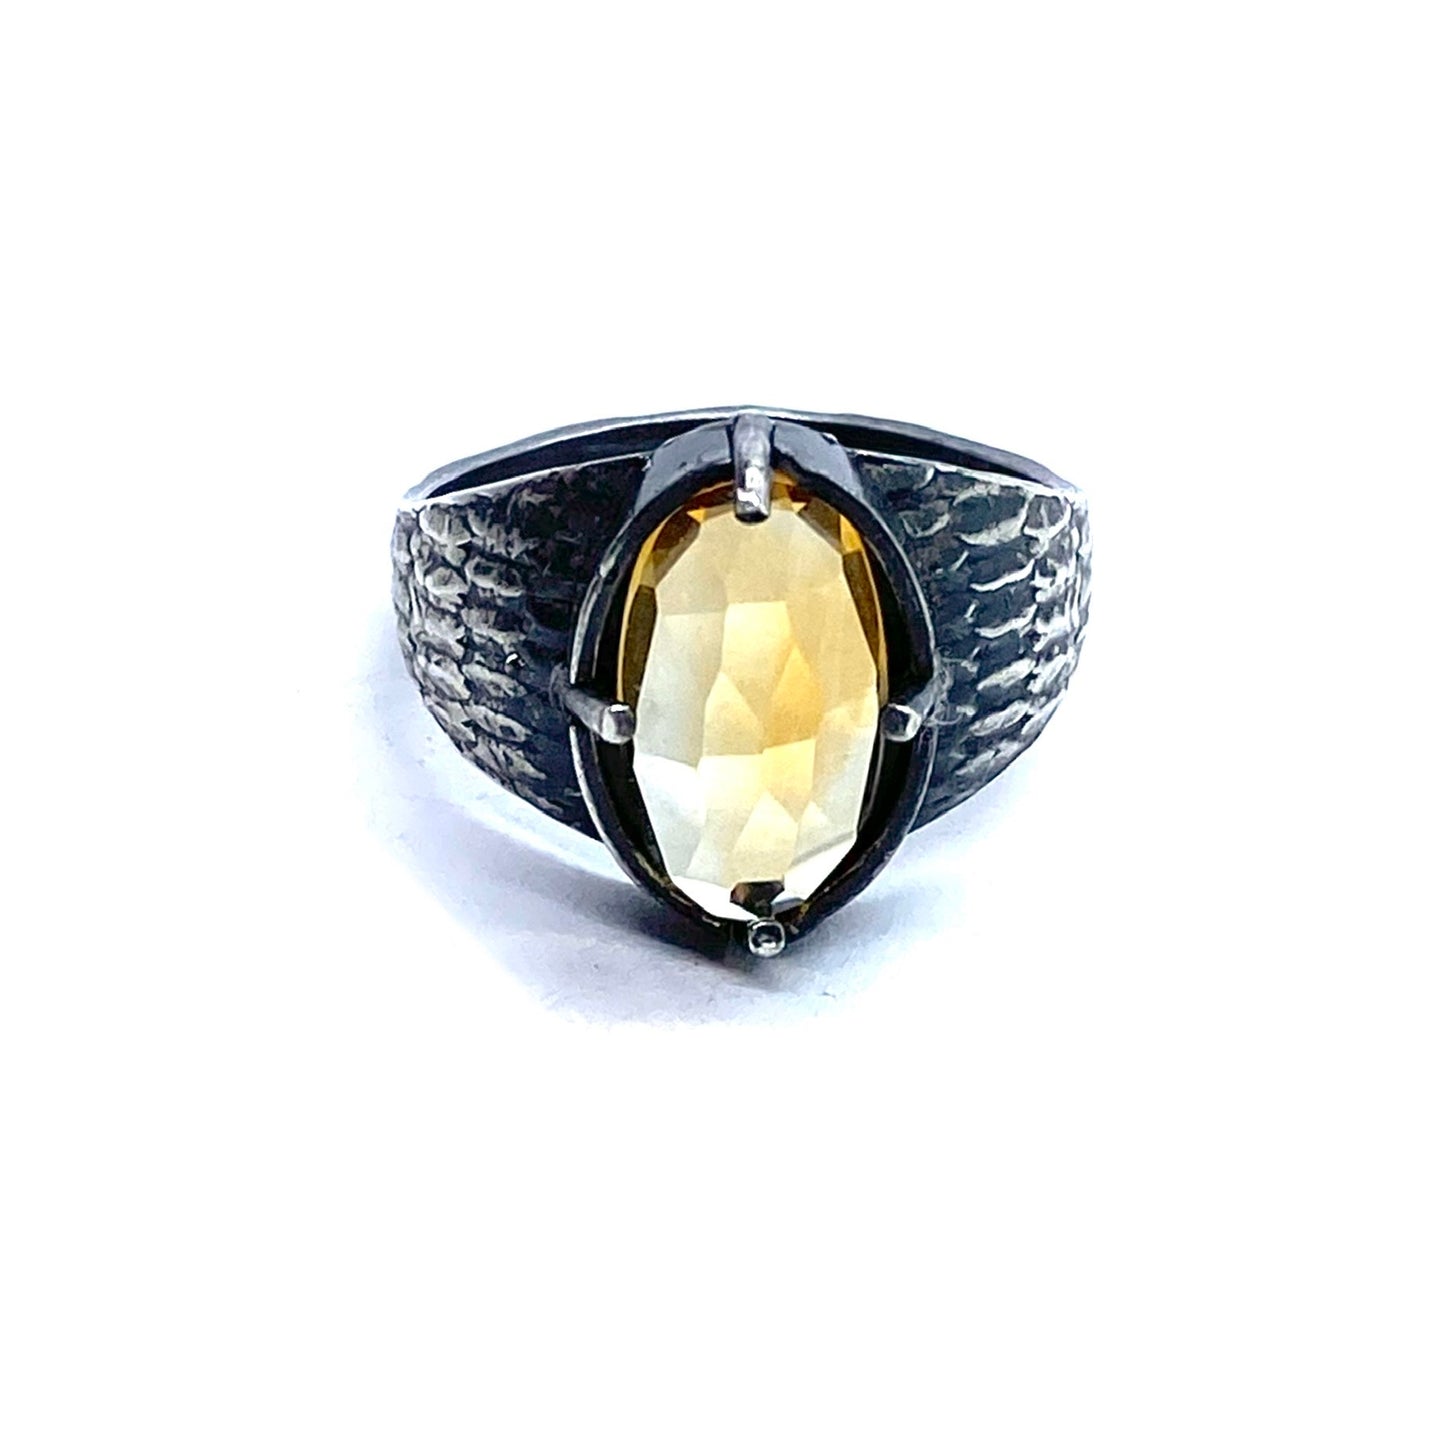 Serpent’s Eye with Citrine in Sterling Silver